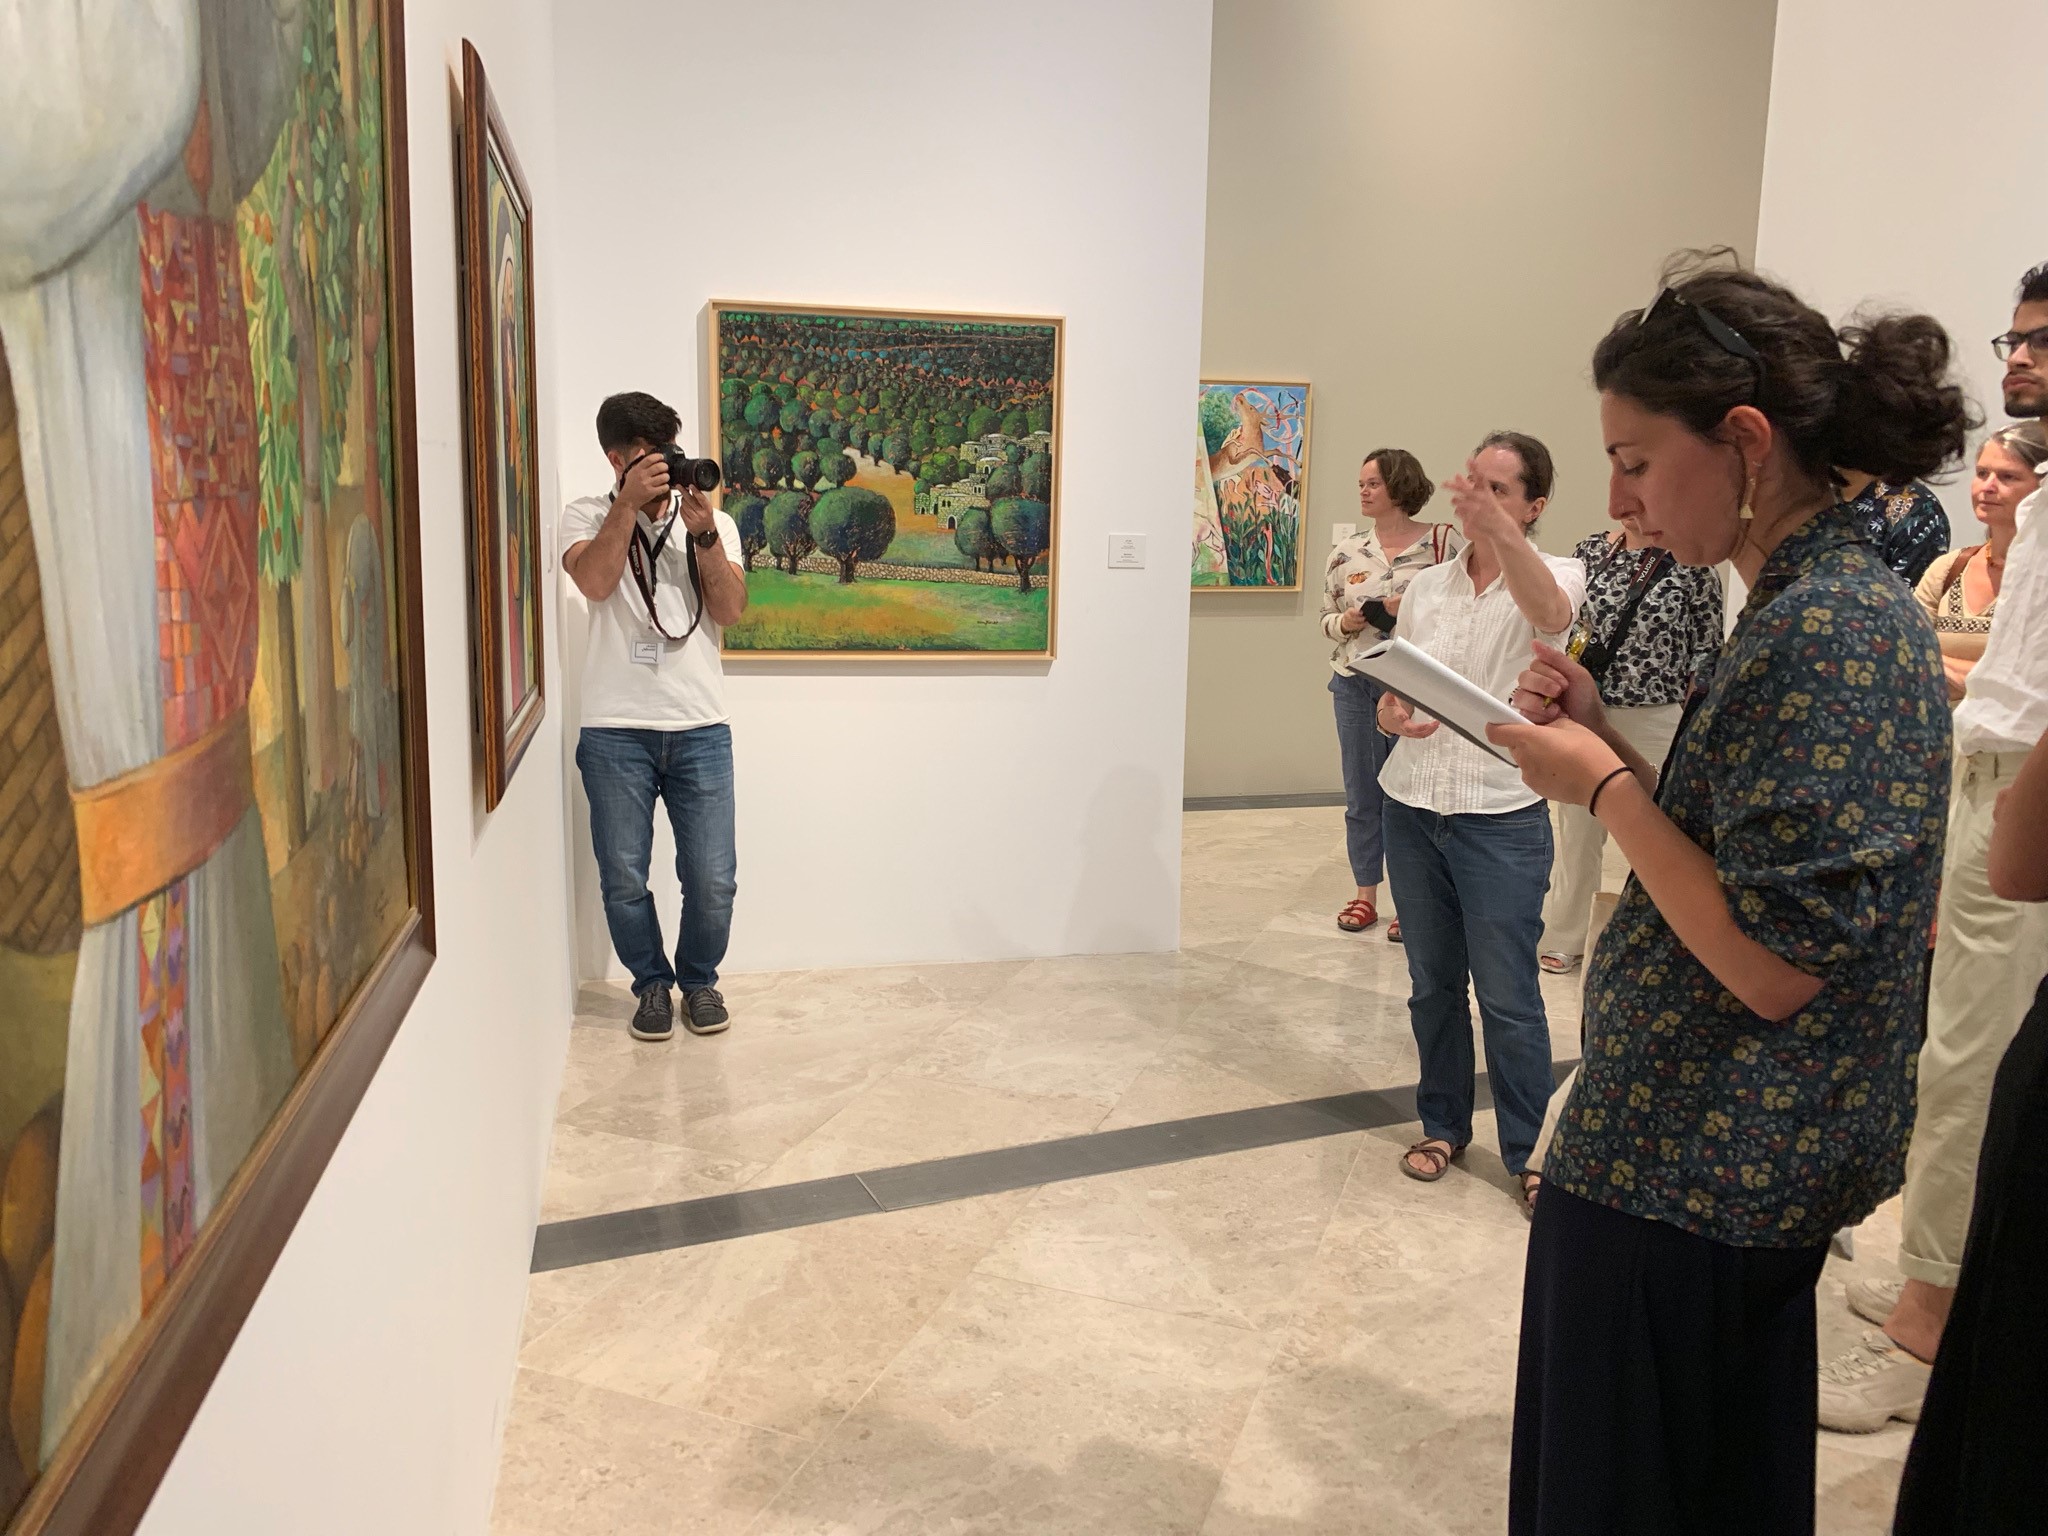 Palestinian Museum, Birzeit. September 2019. Curator Tina Sherwell gives a tour of her exhibition <i>Intimate Terrains</i> on how representations of landscape have evolved from the 1930s to present.